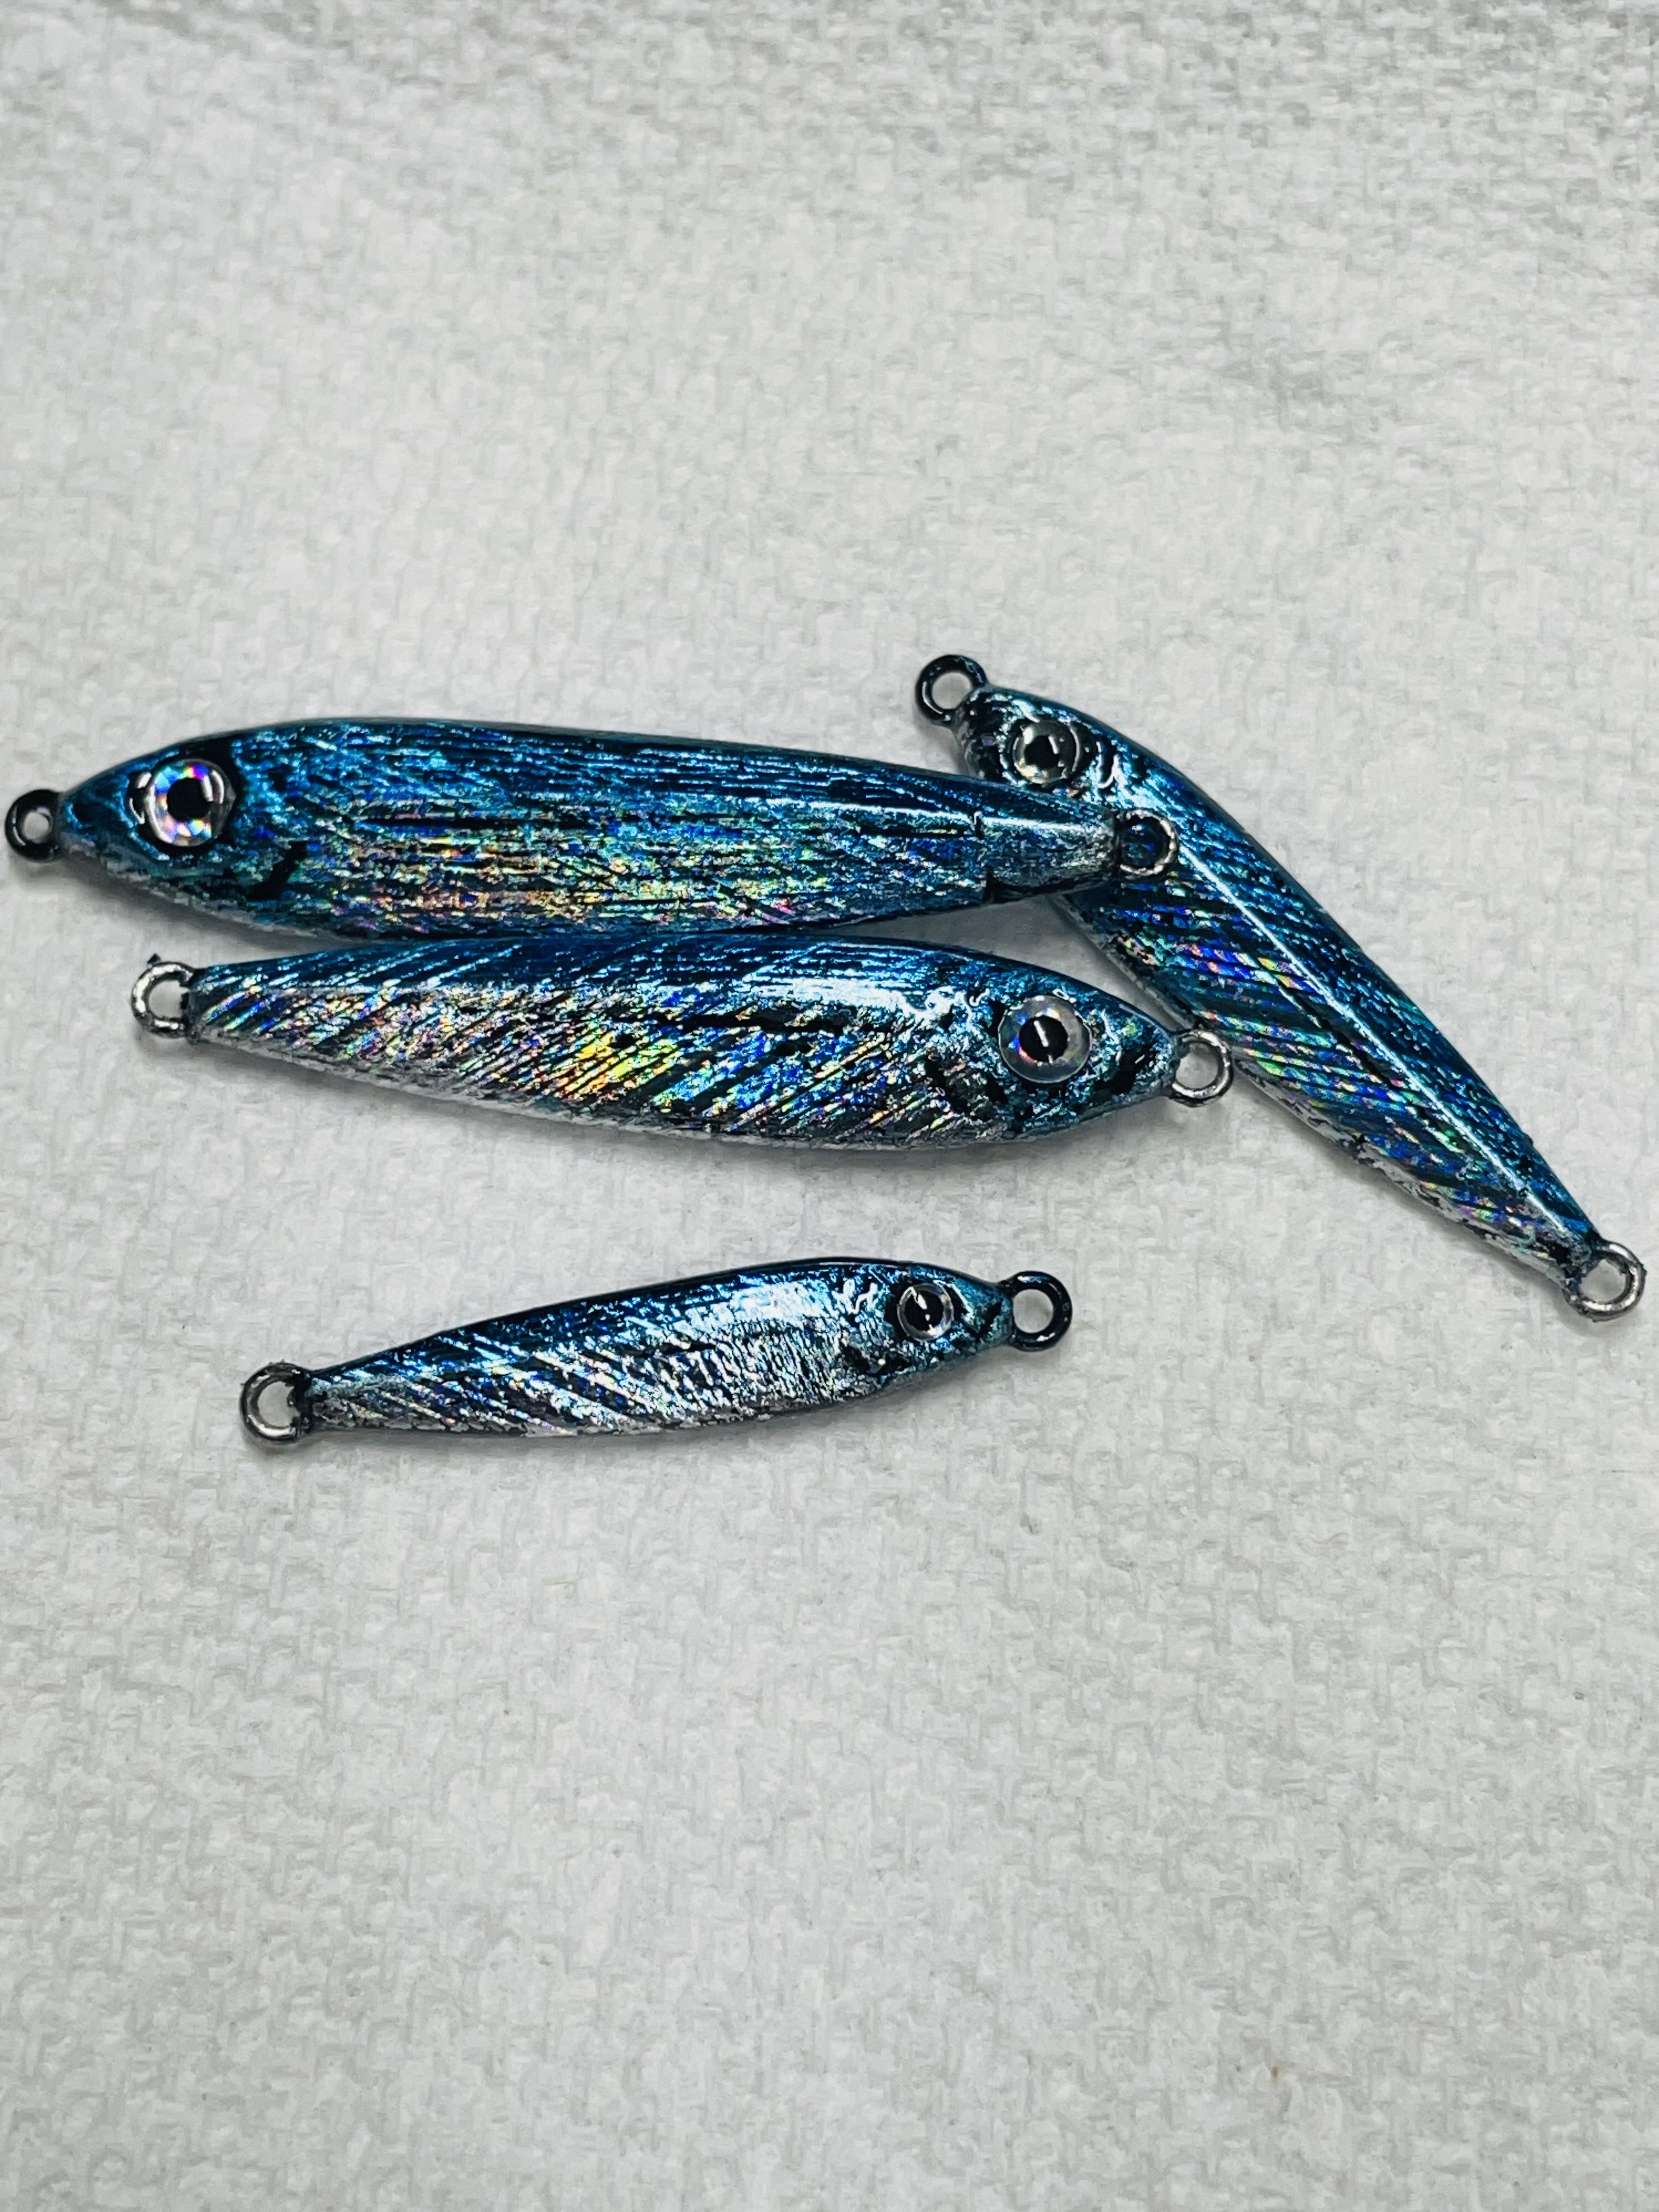 Fluorescent airbrush colors & holographic tape - Hard Baits -   - Tackle Building Forums